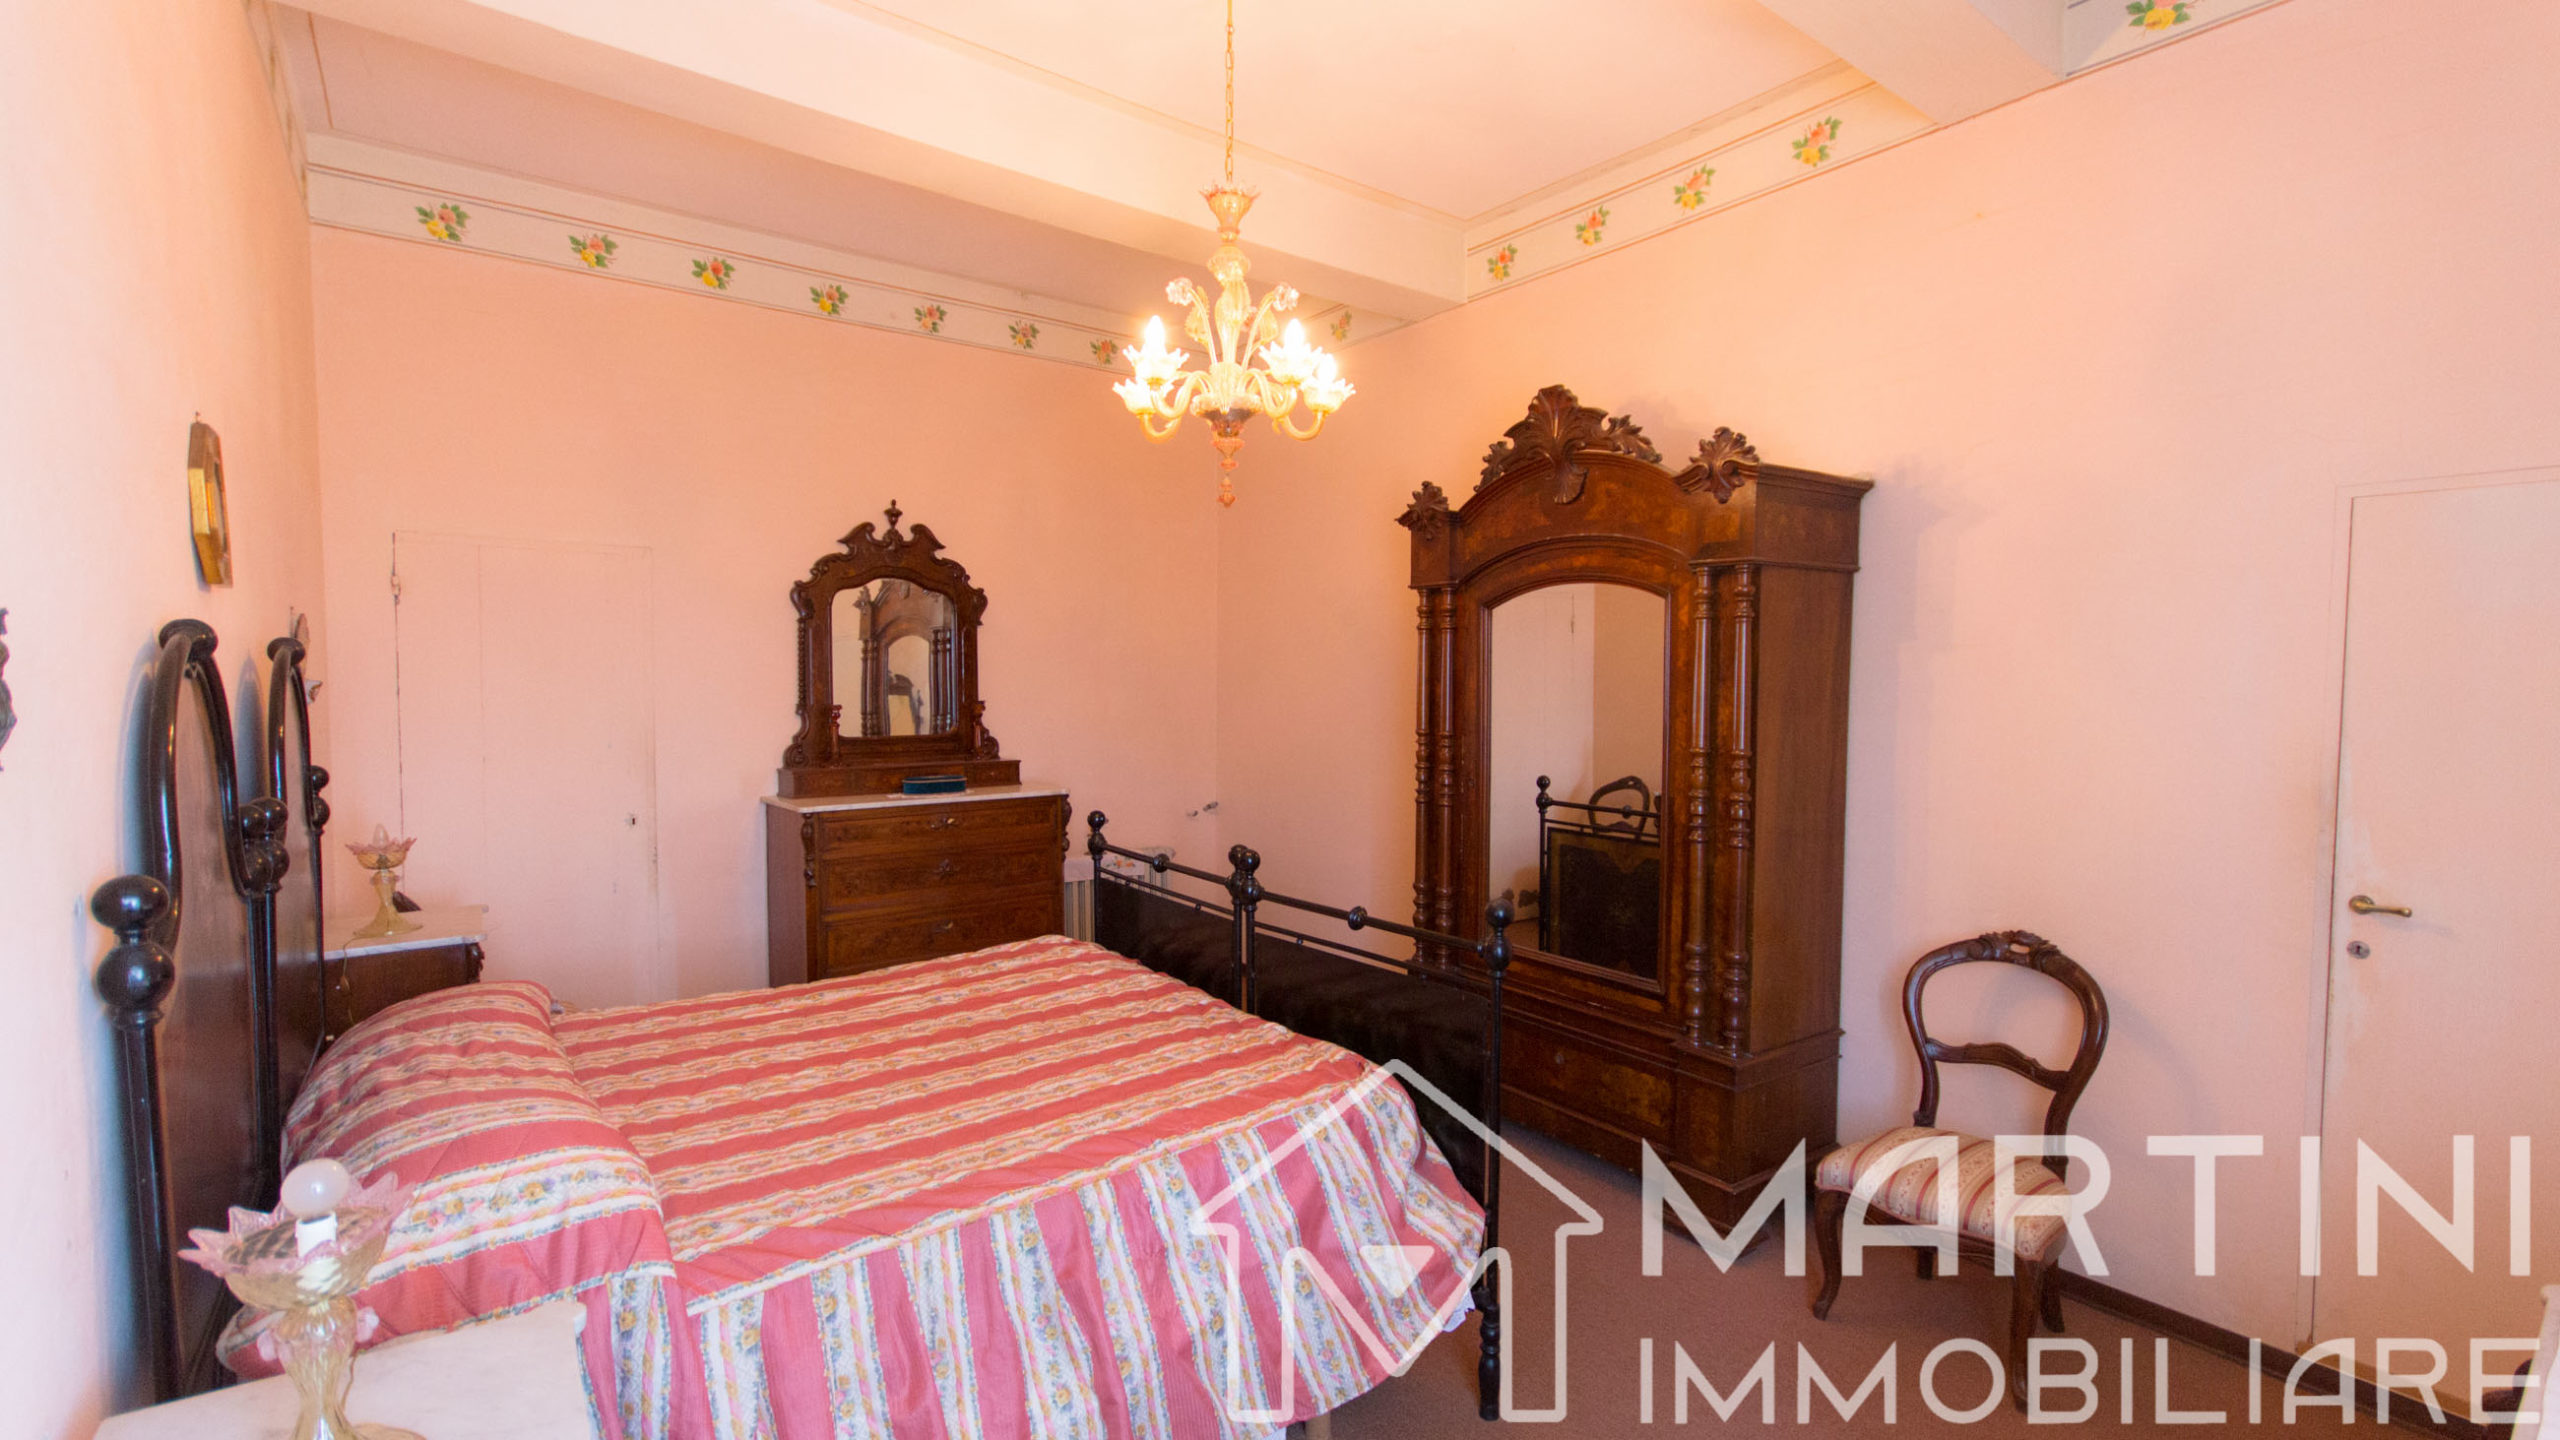 Historical Palace for Sale in the Beautiful Tuscany